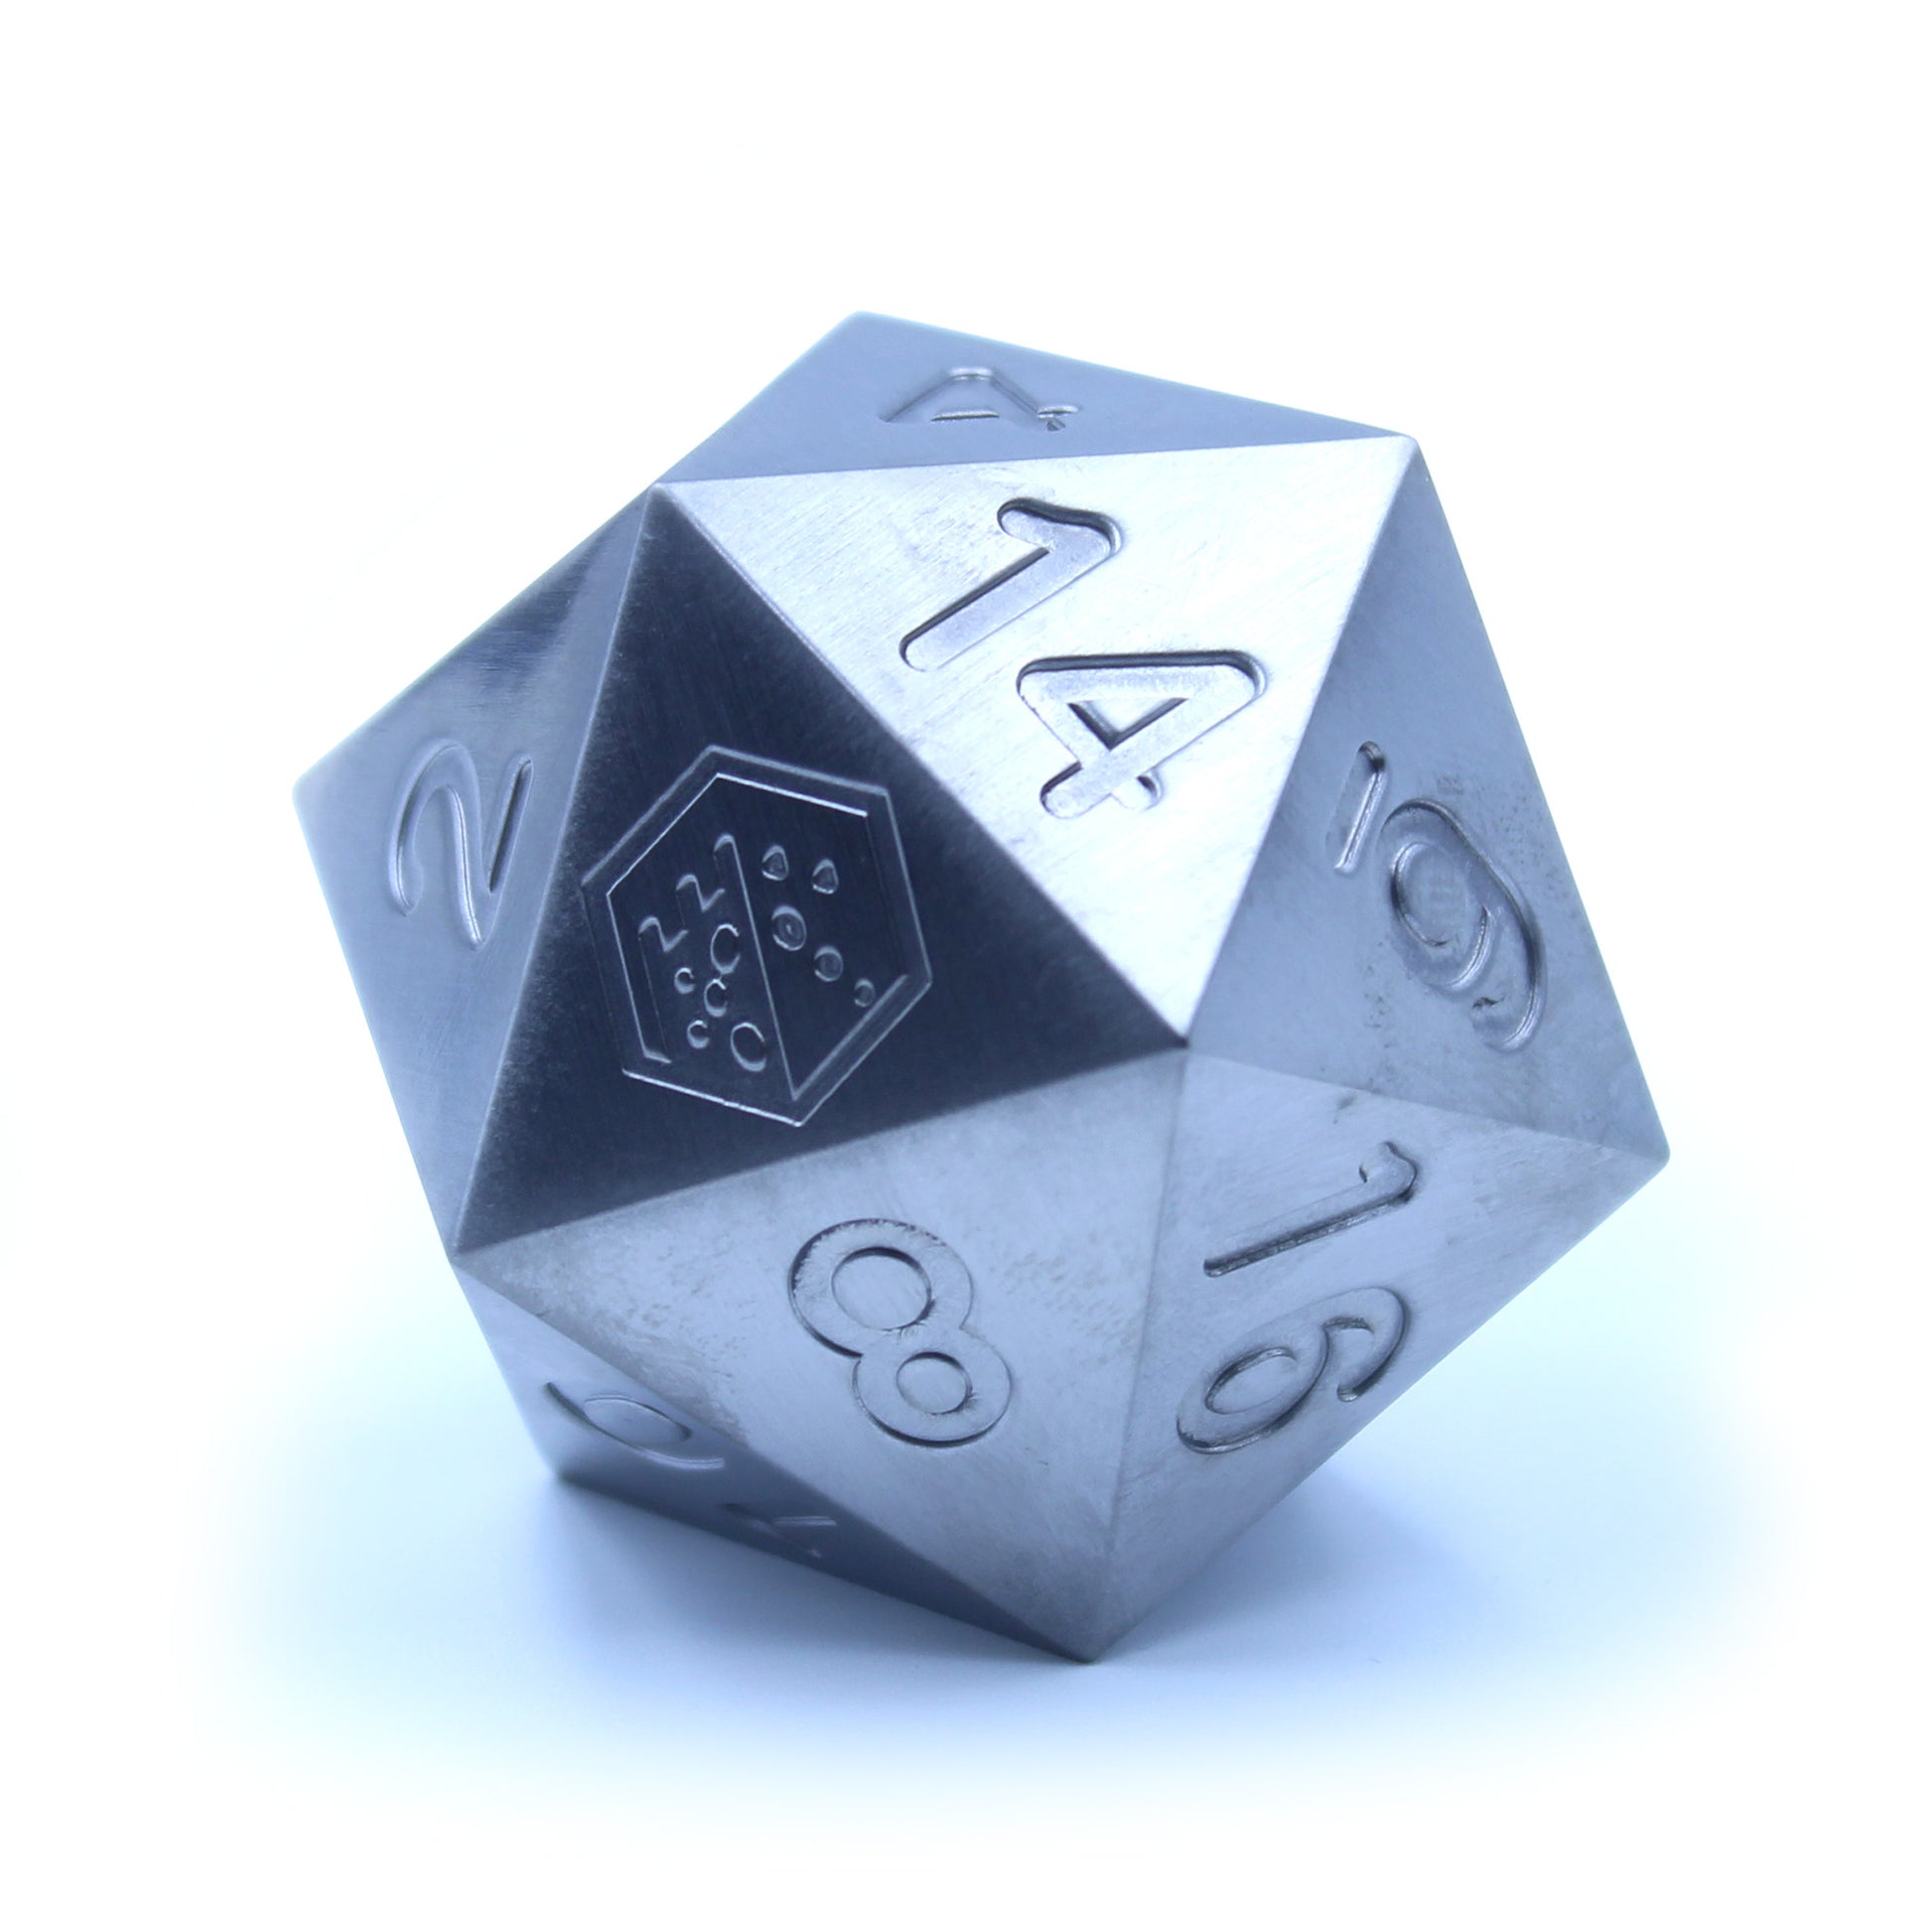 Art] Giant pure Tungsten D20, a.k.a the D20 to use when rolling